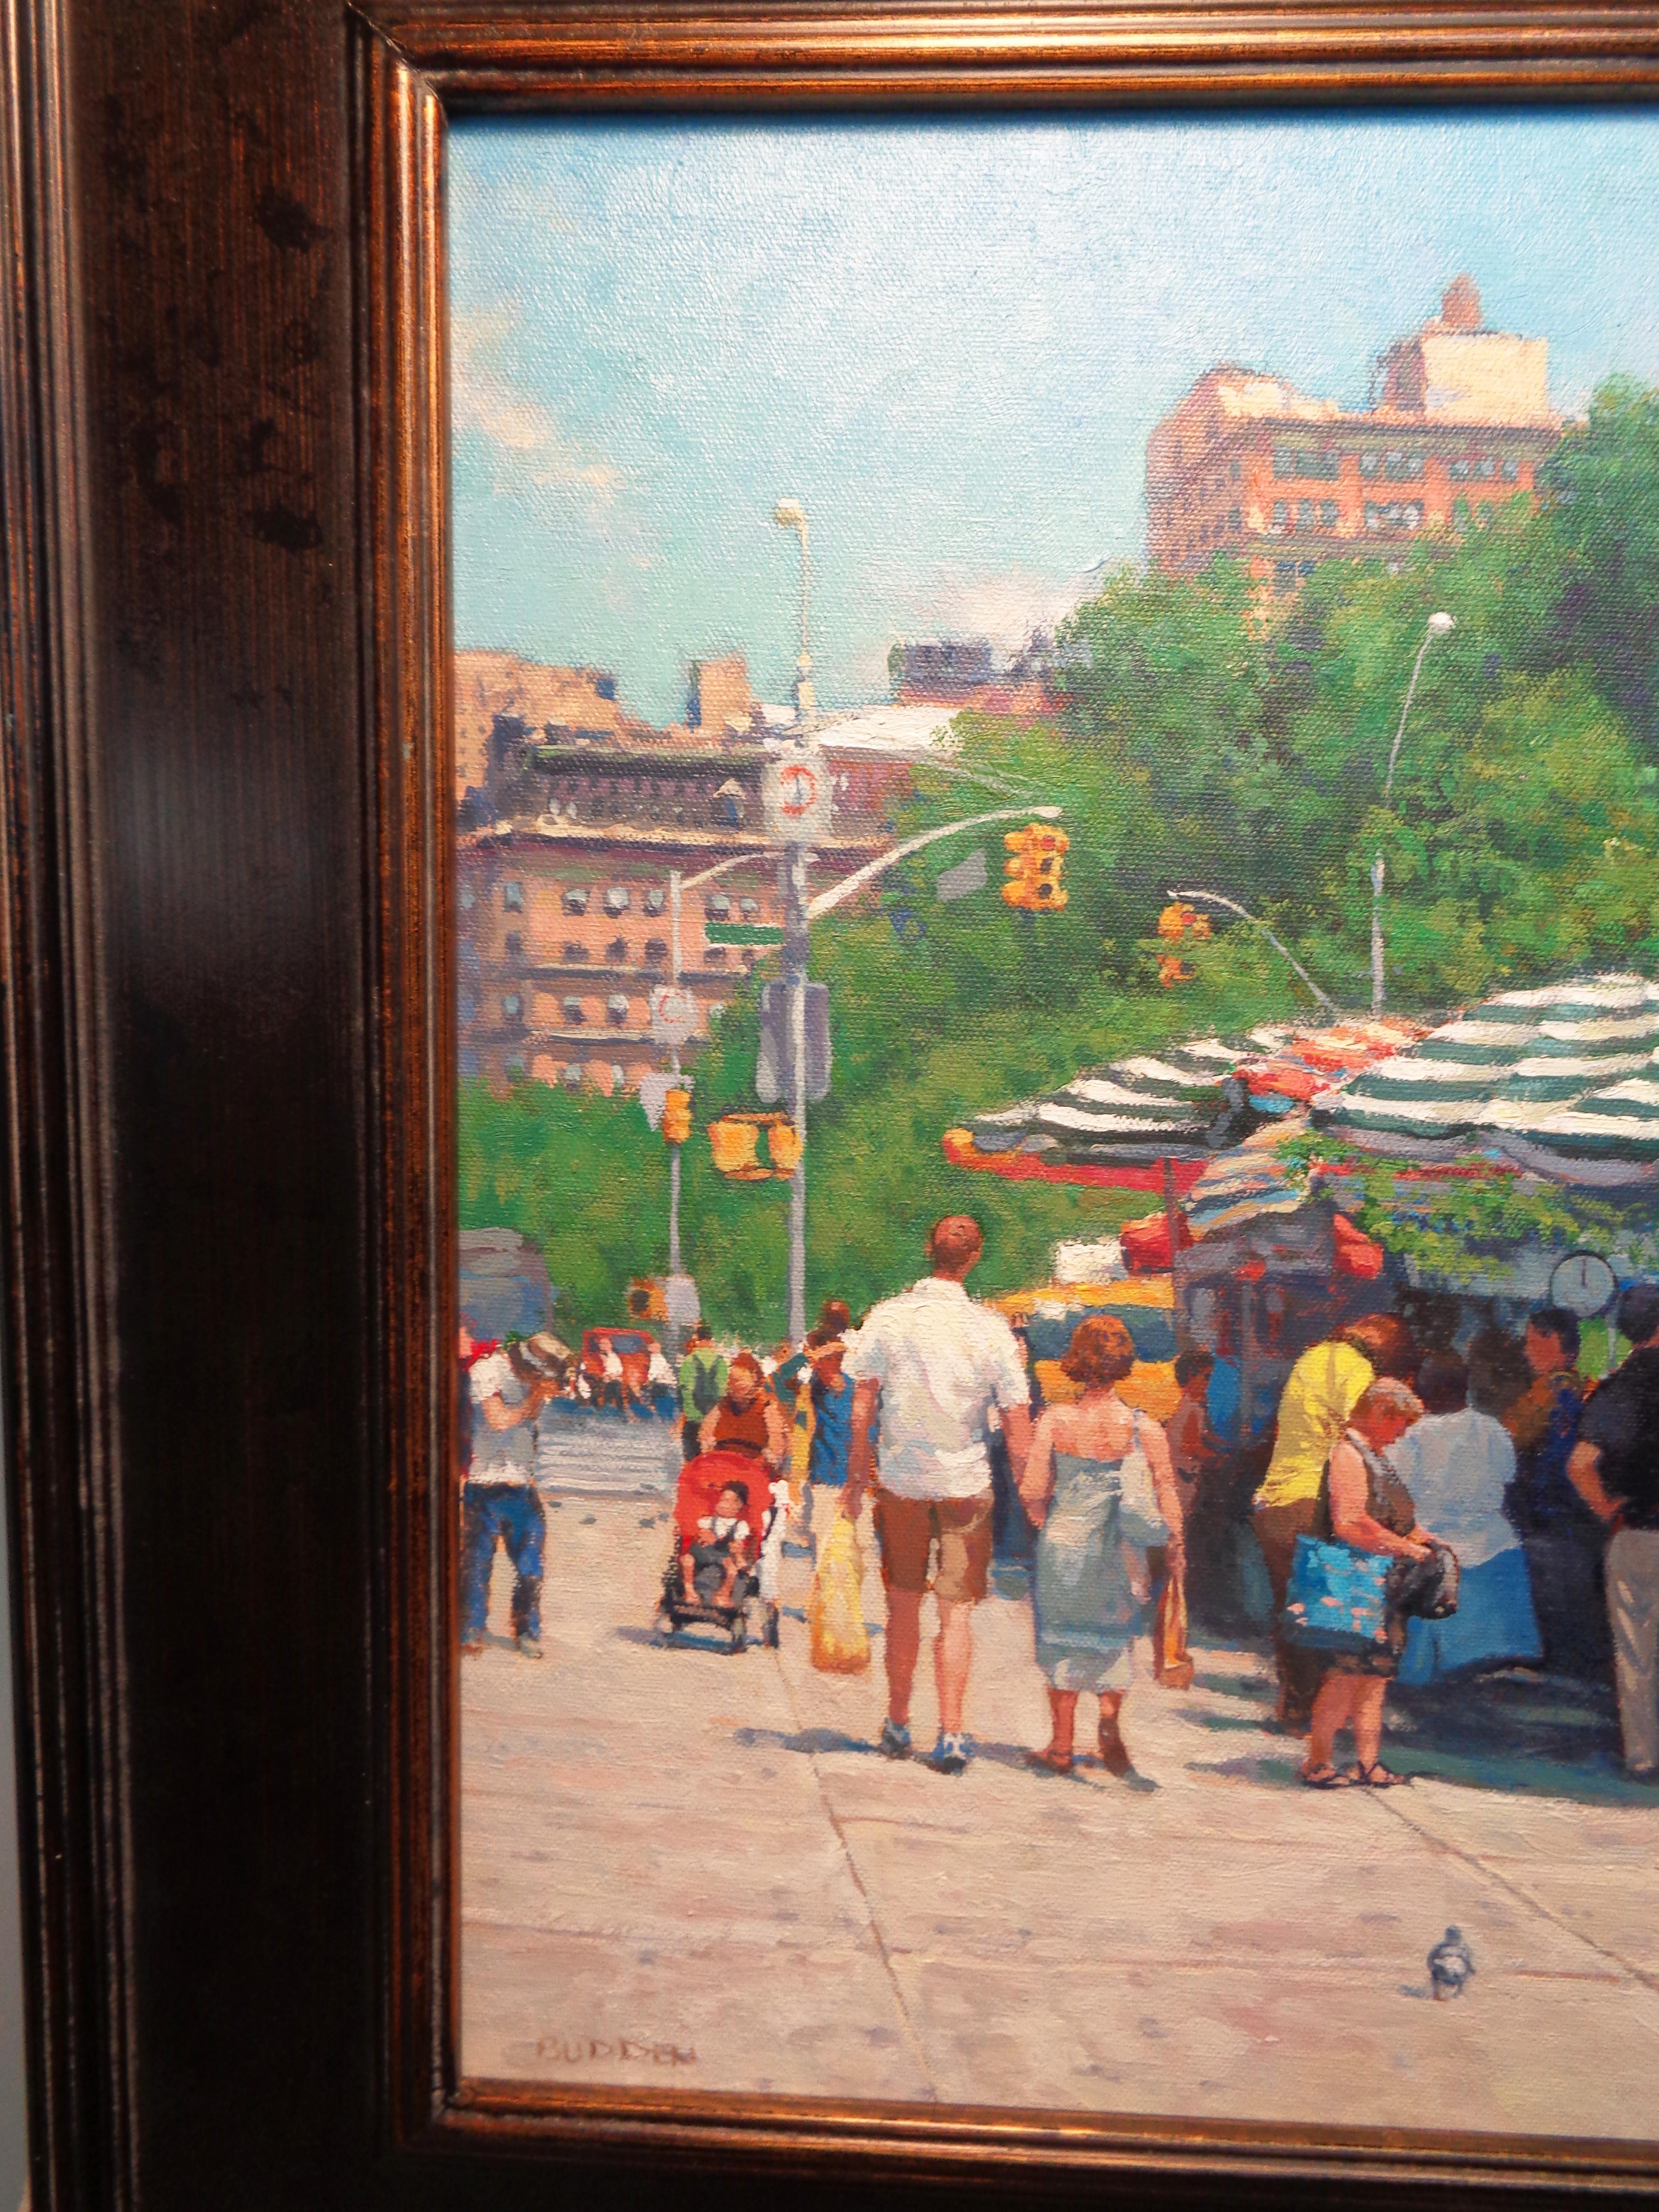  New York City Landscape Oil Painting of Union Square by Michael Budden 1